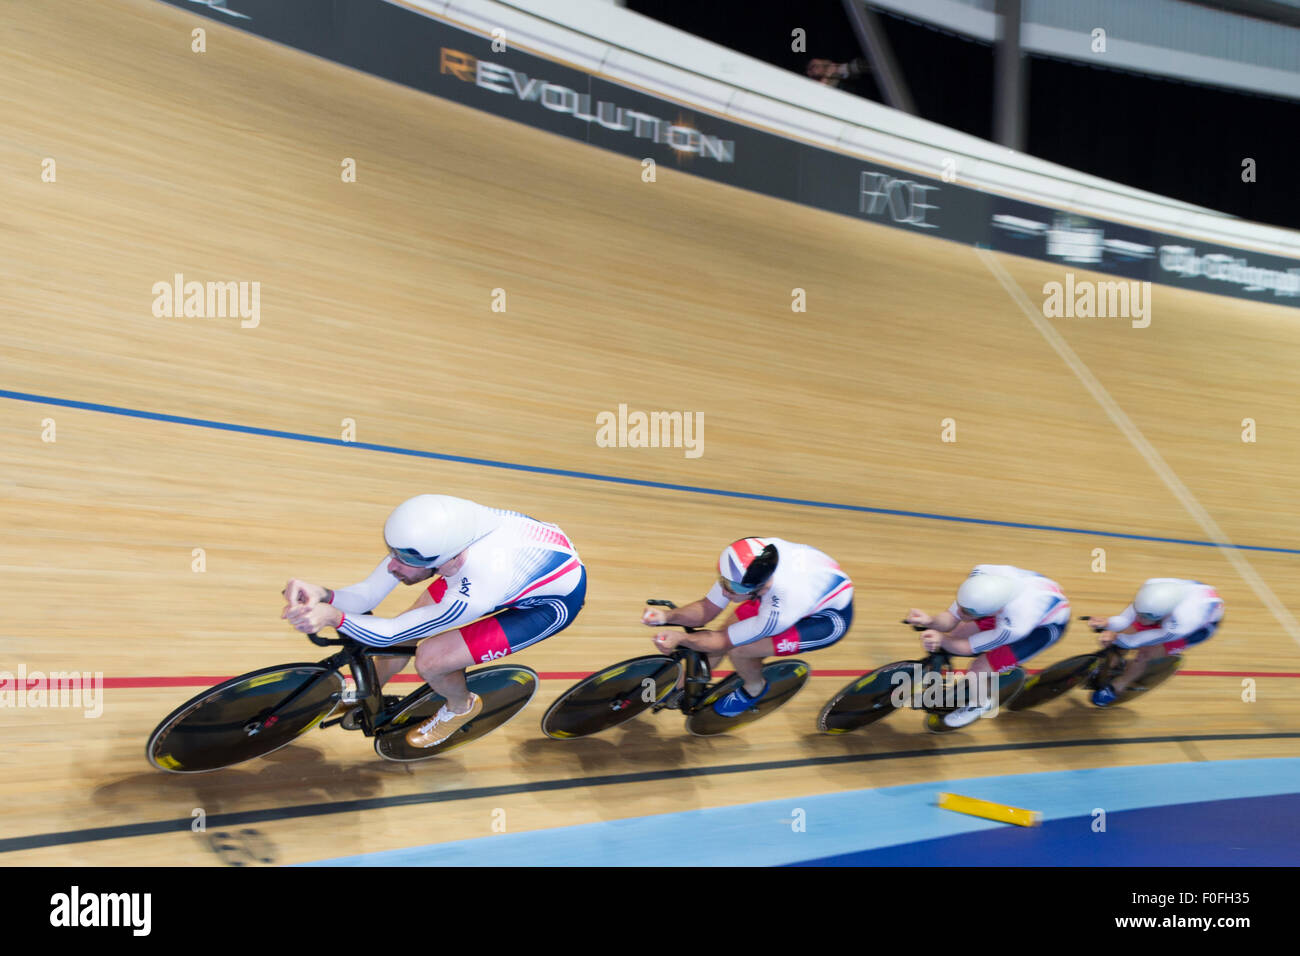 Sir Bradley Wiggins leads the Great Britain team pursuit team at the Revolution Series at Derby Arena, Derby, United Kingdom on 14 August 2015. The Revolution Series is a professional track racing series featuring many of the world's best track cyclists. This event, taking place over 3 days from 14-16 August 2015, is an important preparation event for the Rio 2016 Olympic Games, allowing British riders to score qualifying points for the Games. Stock Photo